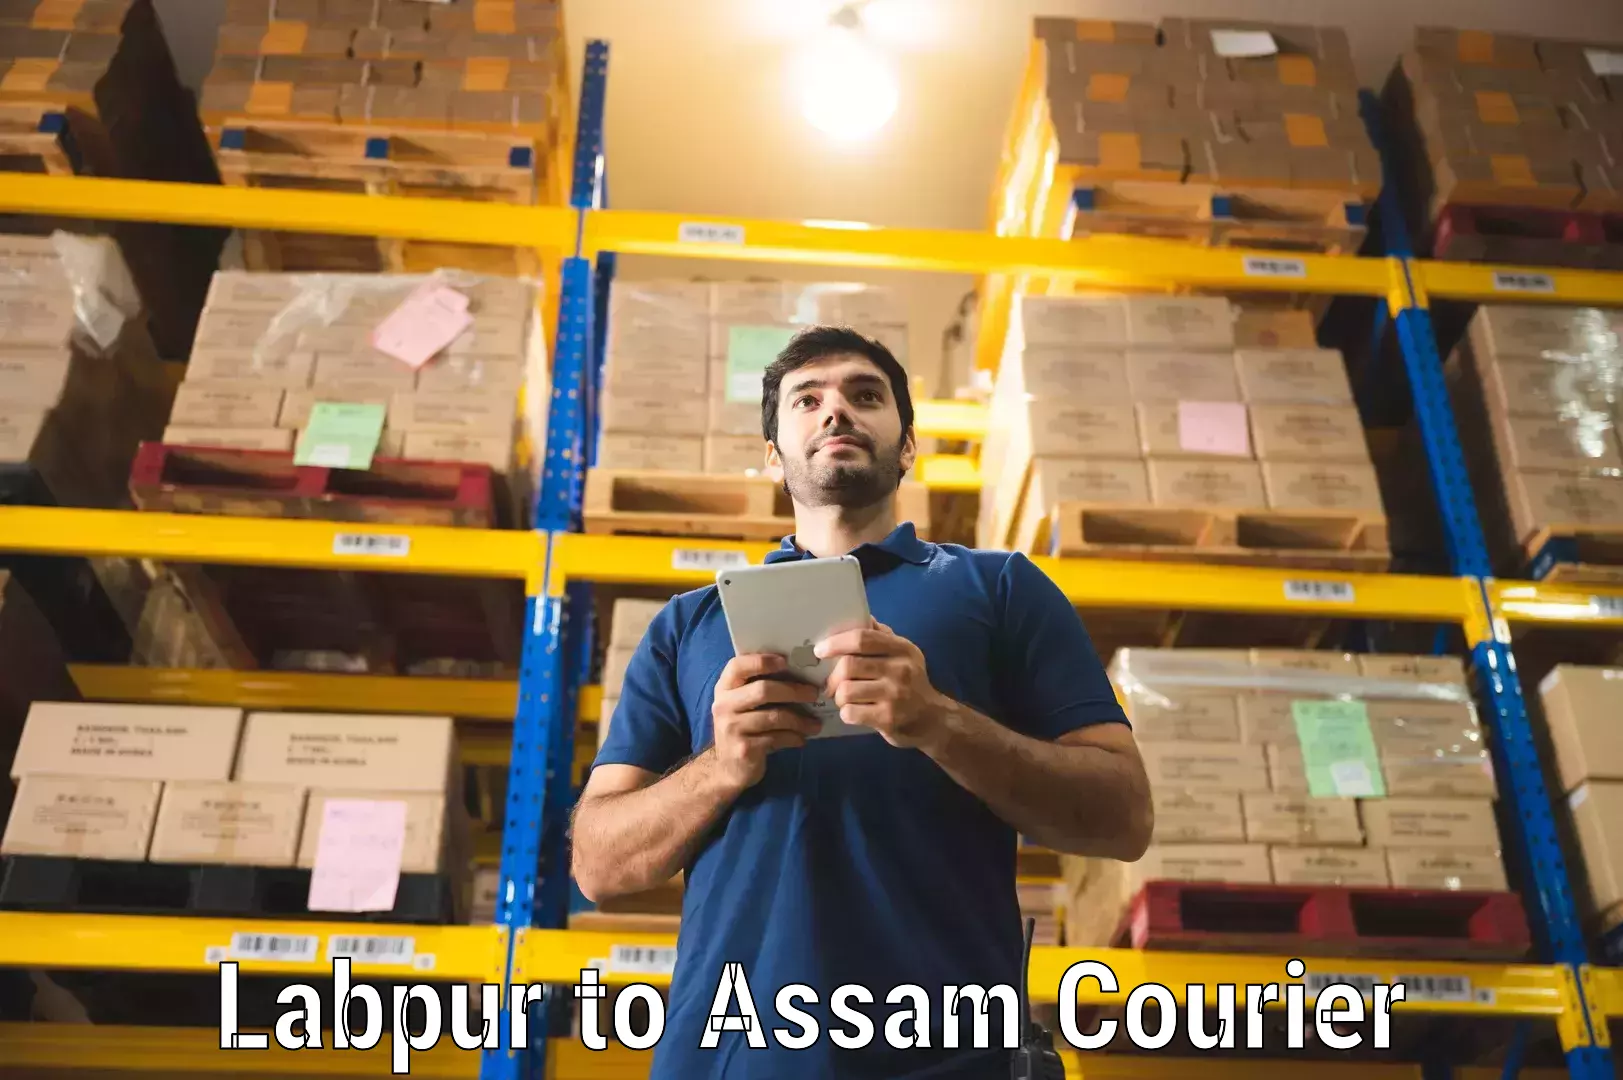 Versatile courier offerings in Labpur to Tinsukia